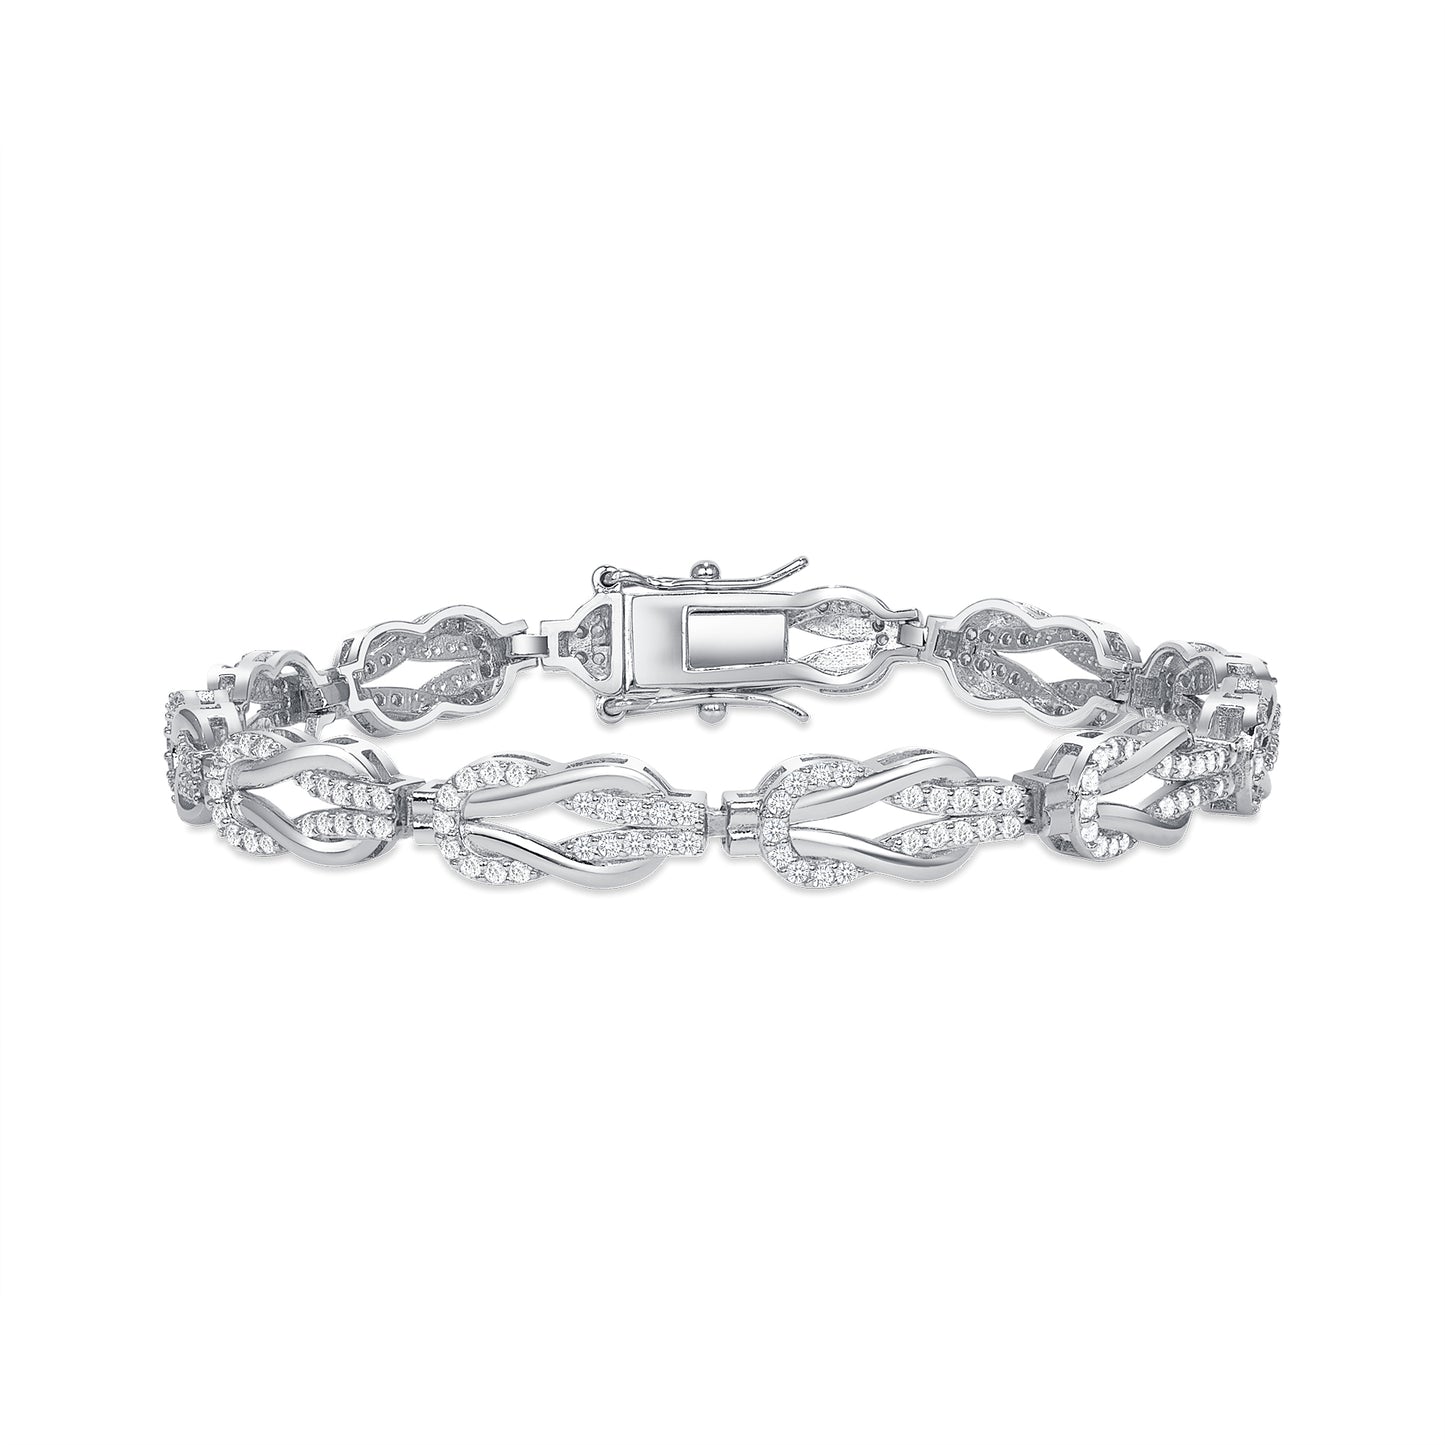 Silver 925 Rhodium Plated Clear Cubic Zirconia Bracelet. BB4929